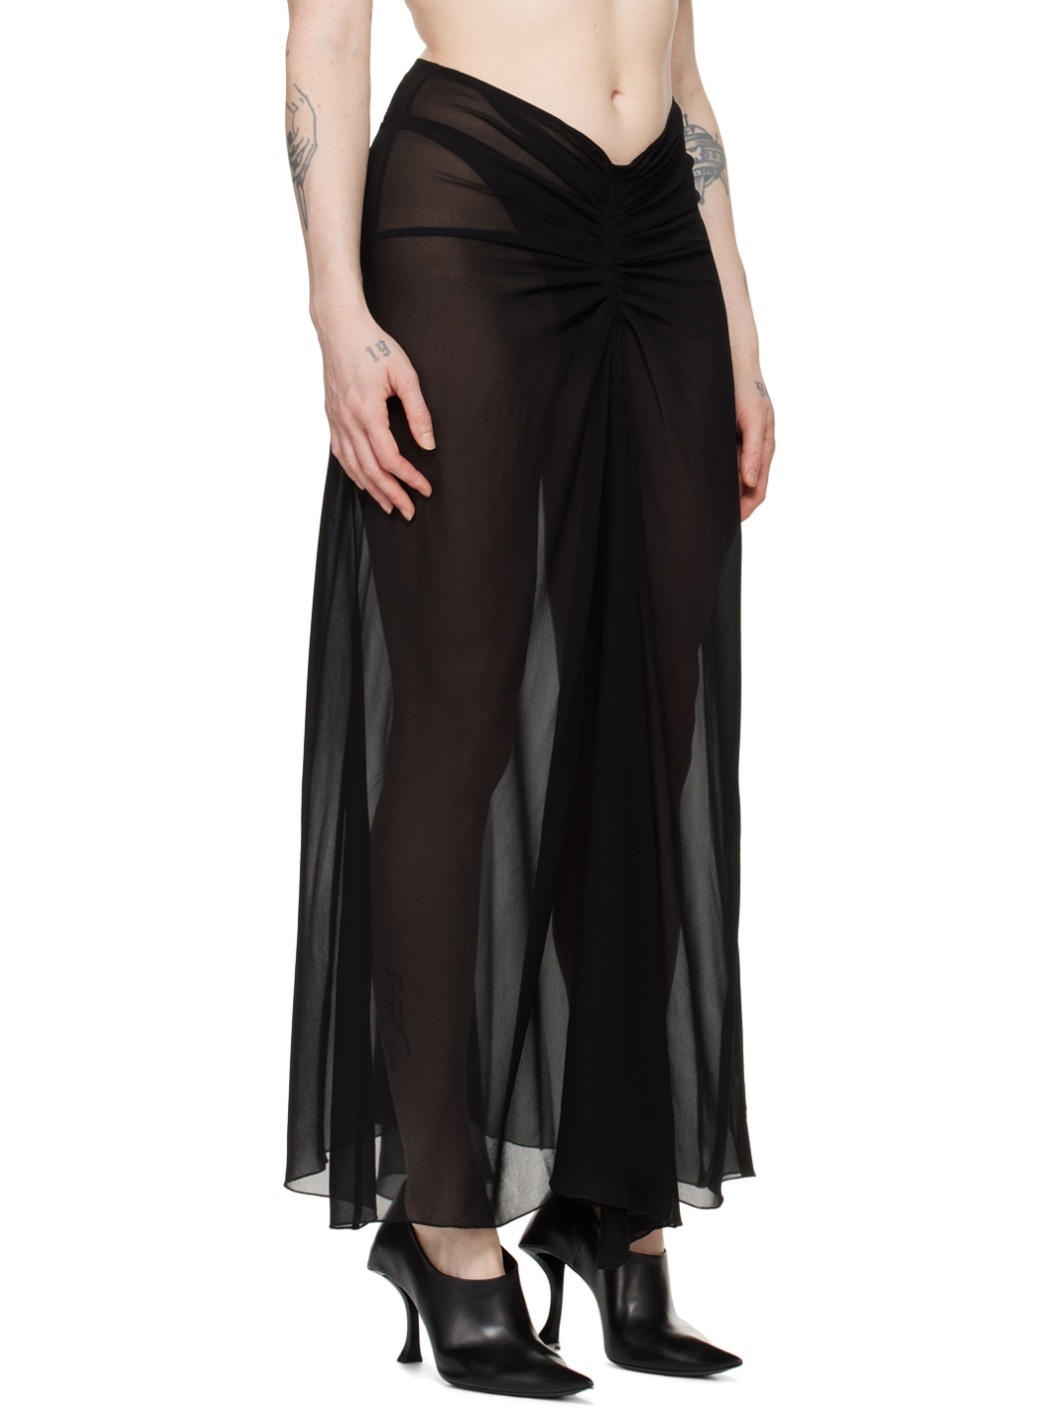 Black Ruched Maxi Skirt - 2